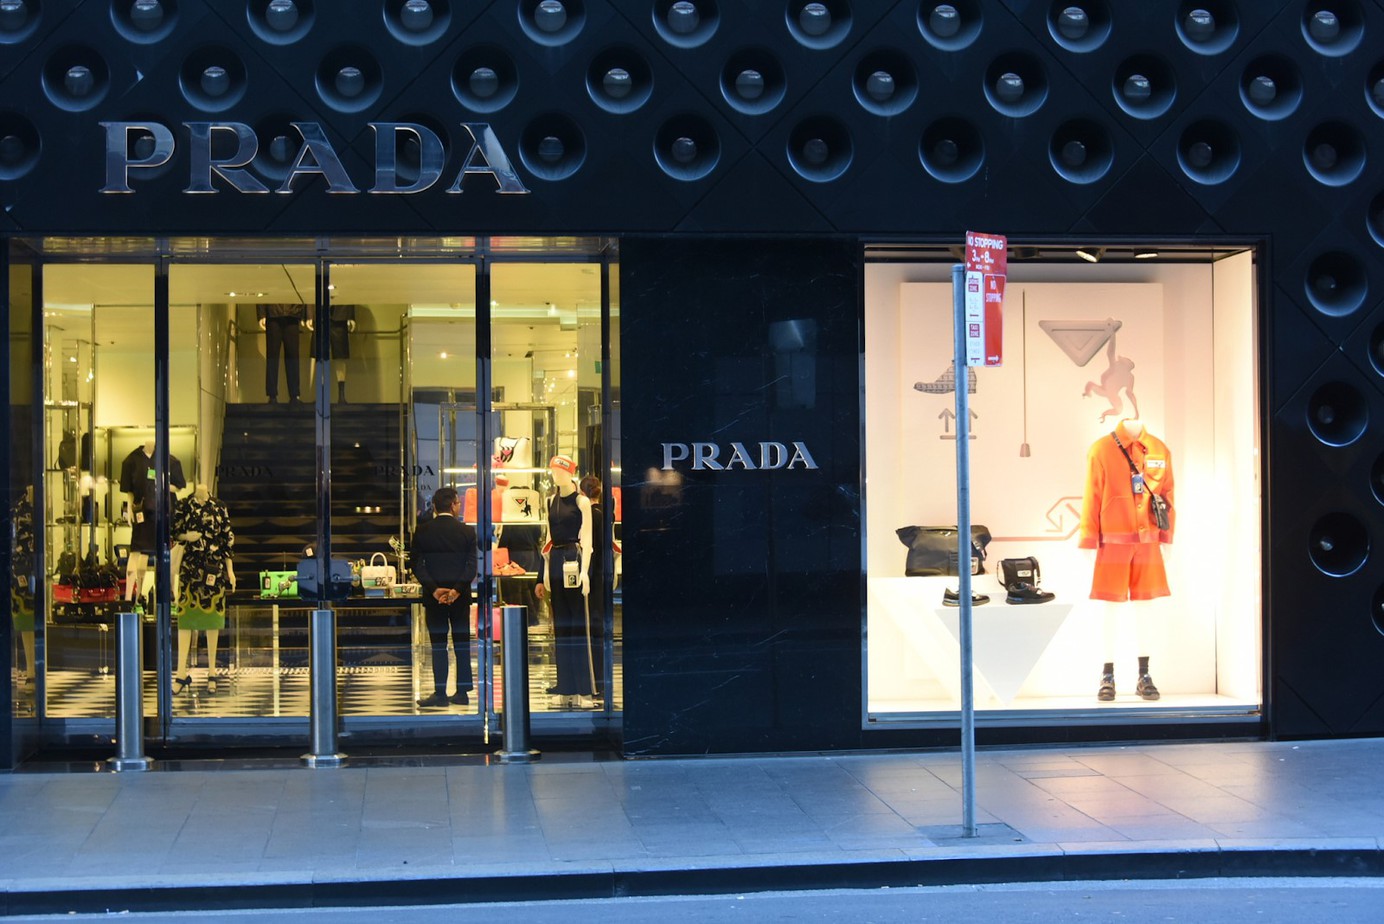 PRADA - There is no such thing as one perfect type of clothing